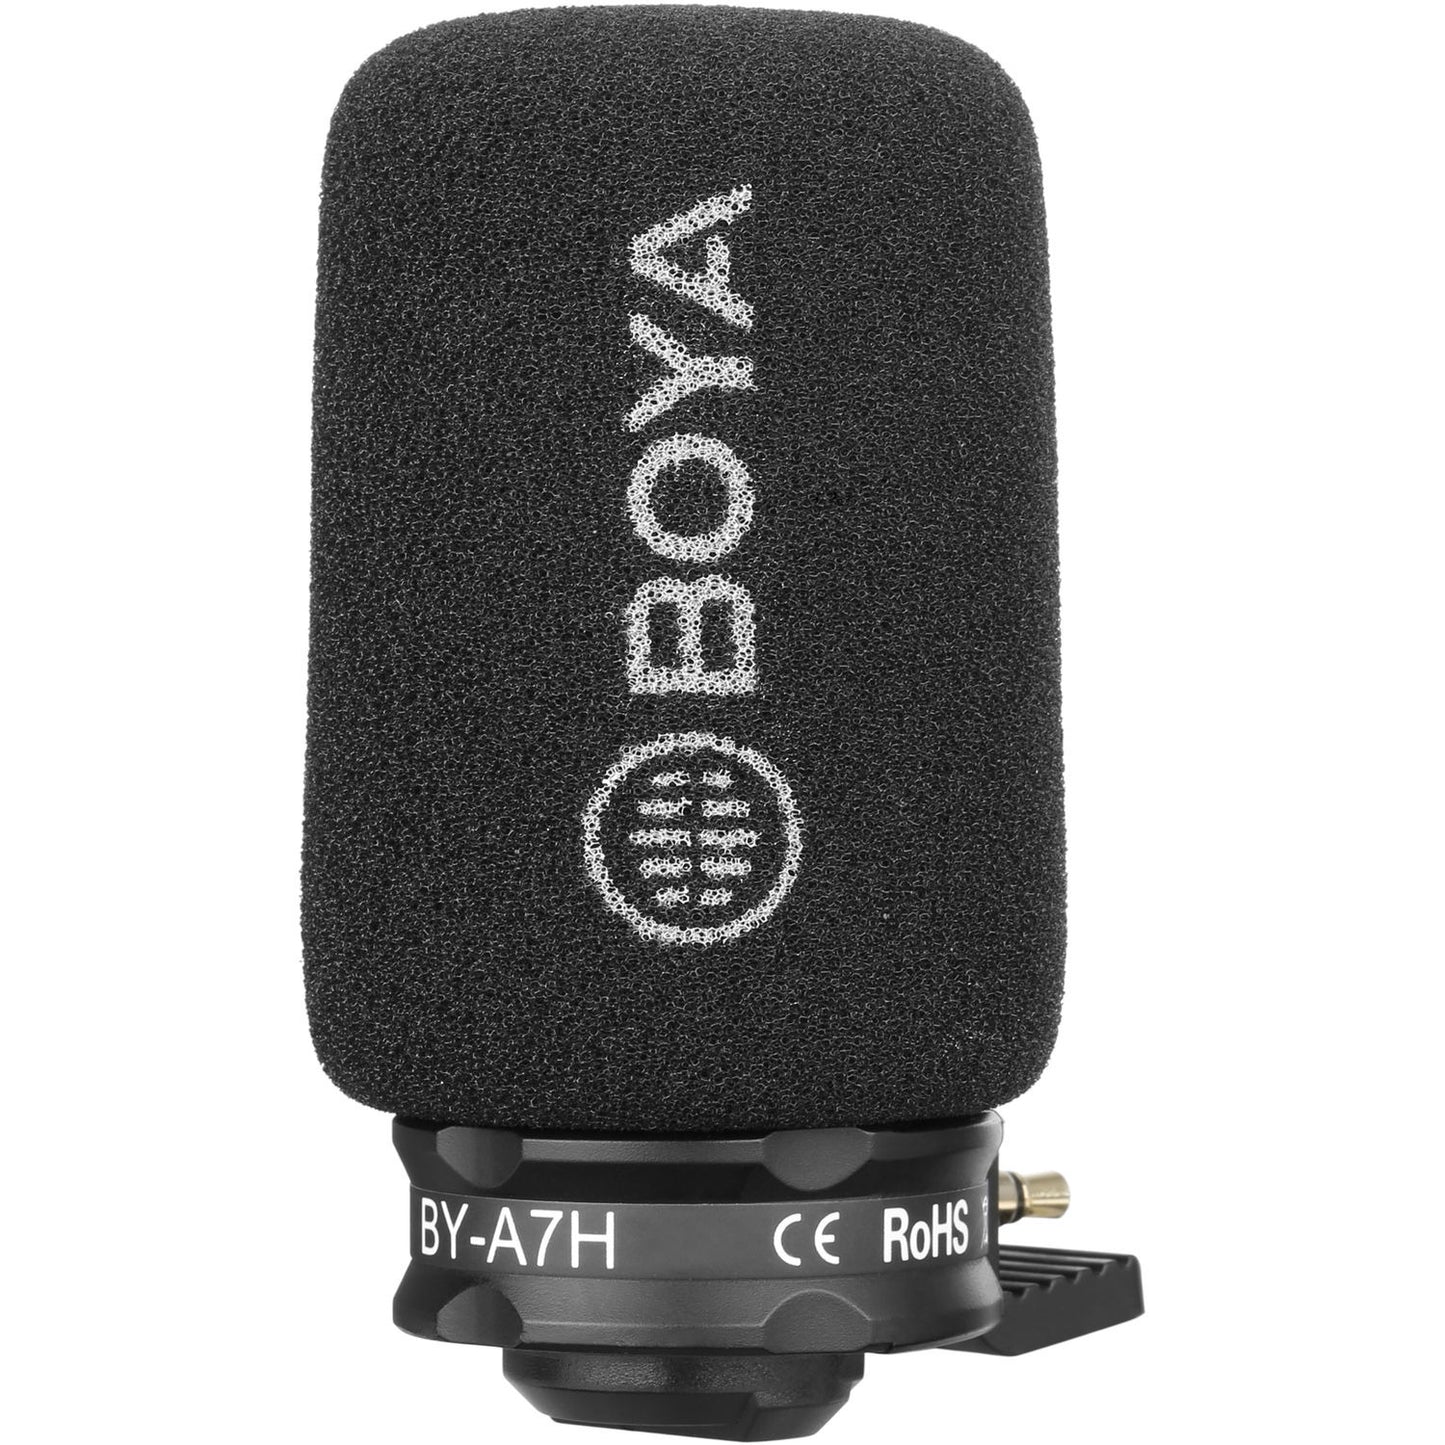 BOYA BY-A7H 3.5mm TRRS Mini Jack Plug-In Condenser Microphone with Carrying Pouch Case, Foam Windscreen, Omnidirectional Polar Pattern for High-Quality Recordings for iOS, Android, Smartphones